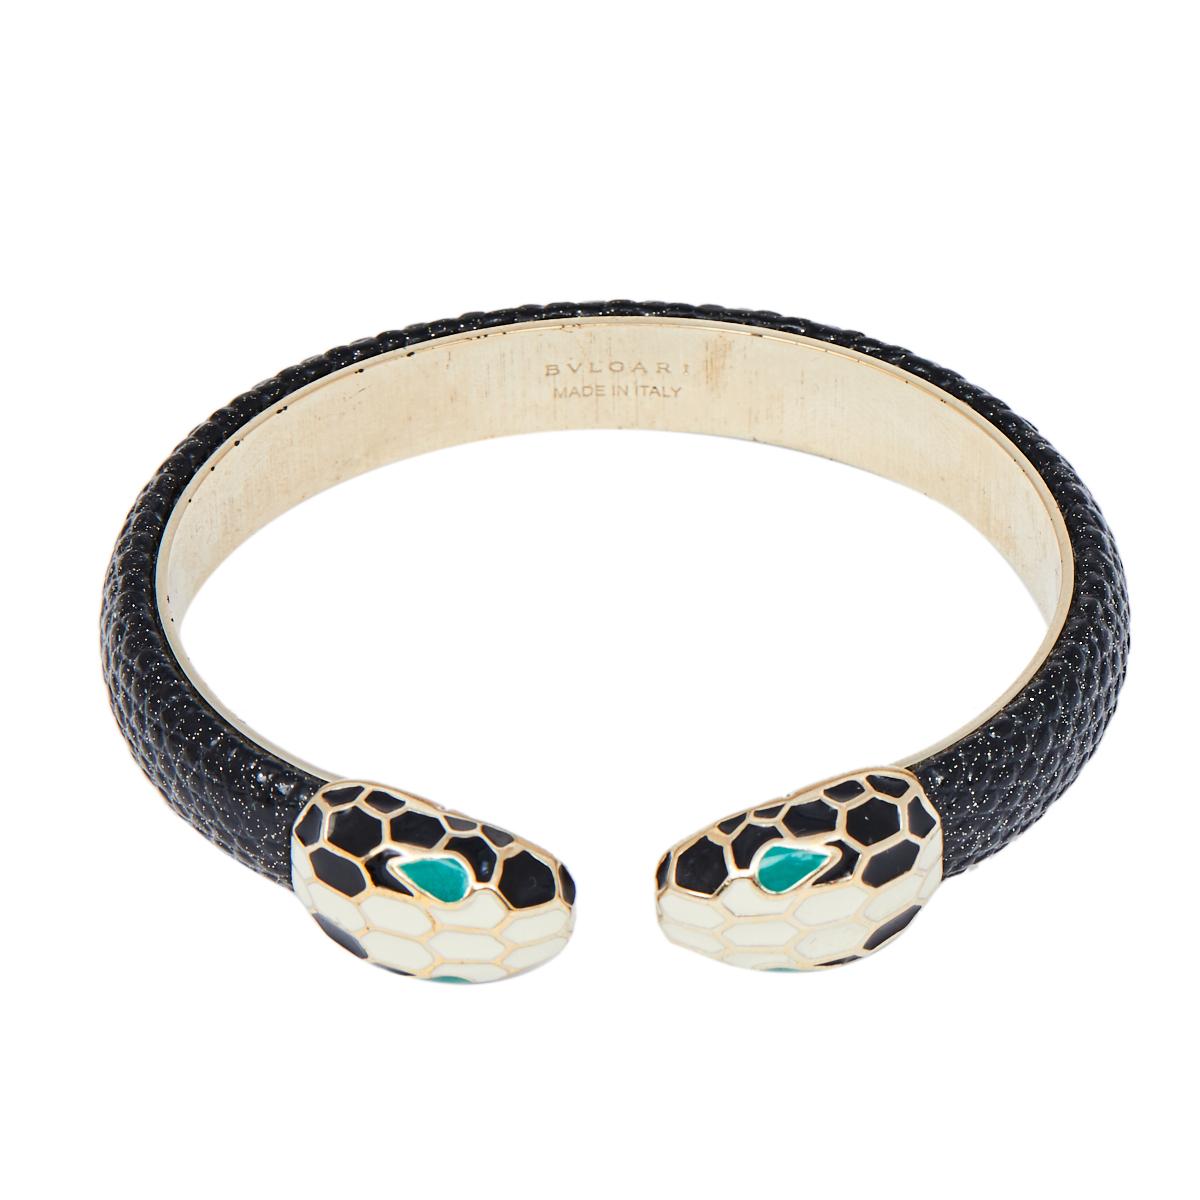 Created using gold-plated metal and leather, this Bvlgari Serpenti Forever open cuff bracelet is highlighted with Serpenti heads on its ends coated with enamel. It's a signature Bvlgari style that you'll love wearing.

Includes: Original Box,